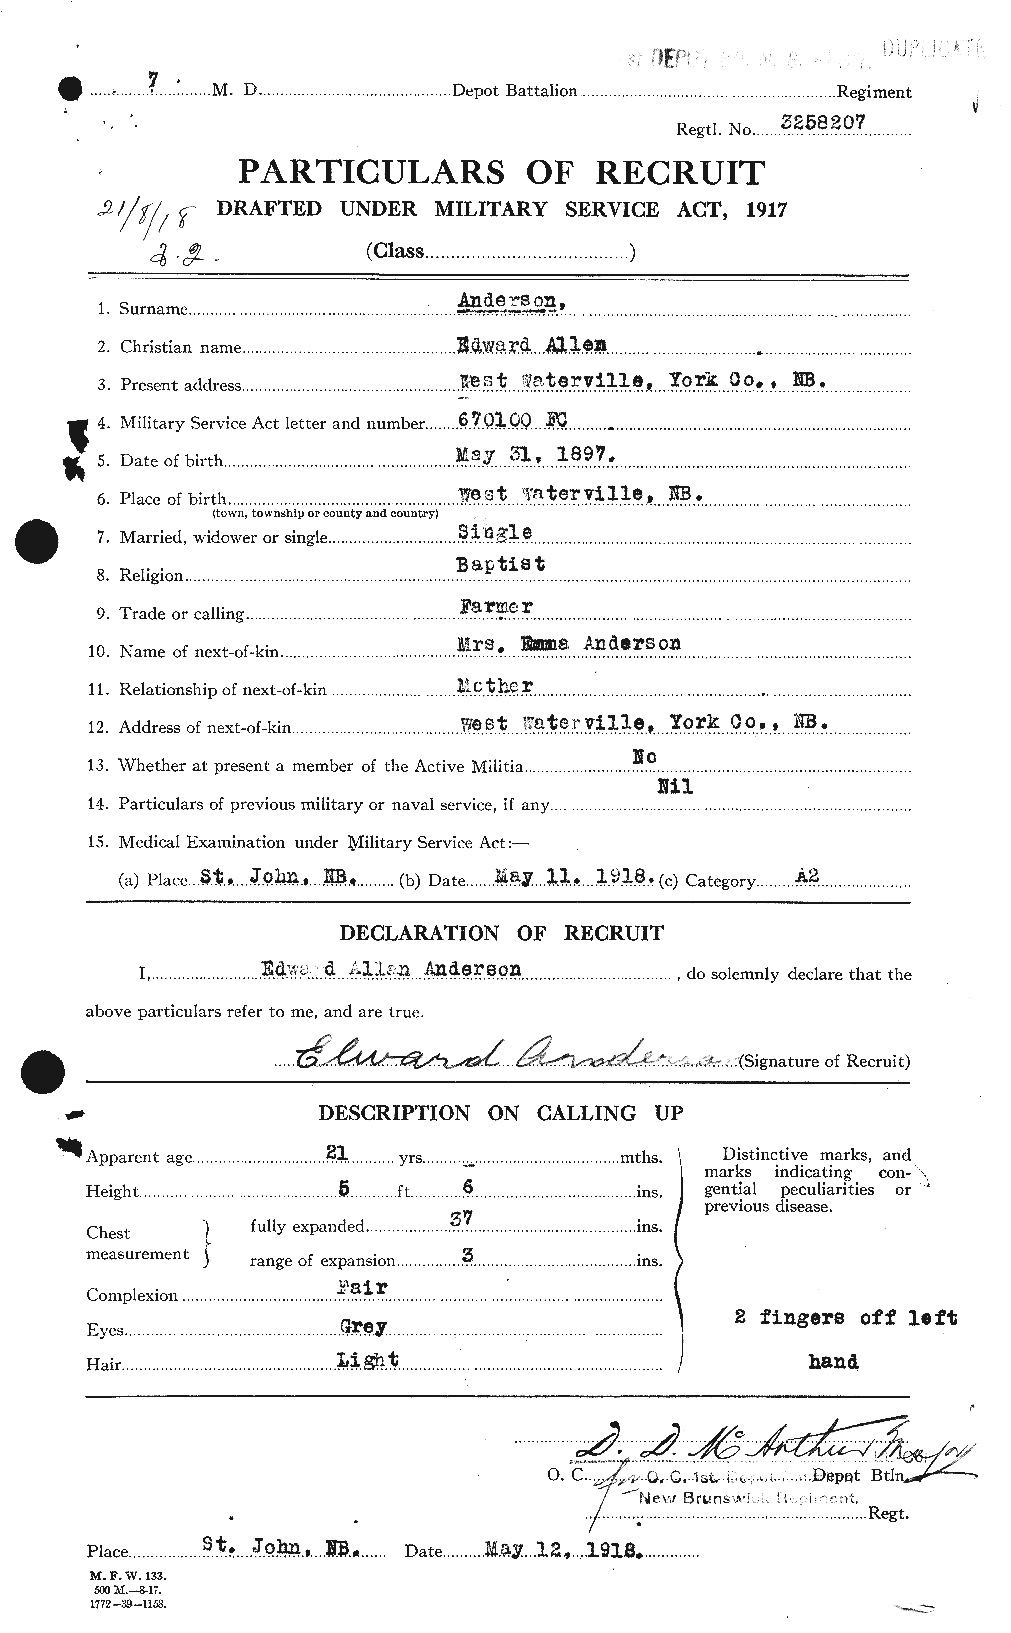 Personnel Records of the First World War - CEF 209940a